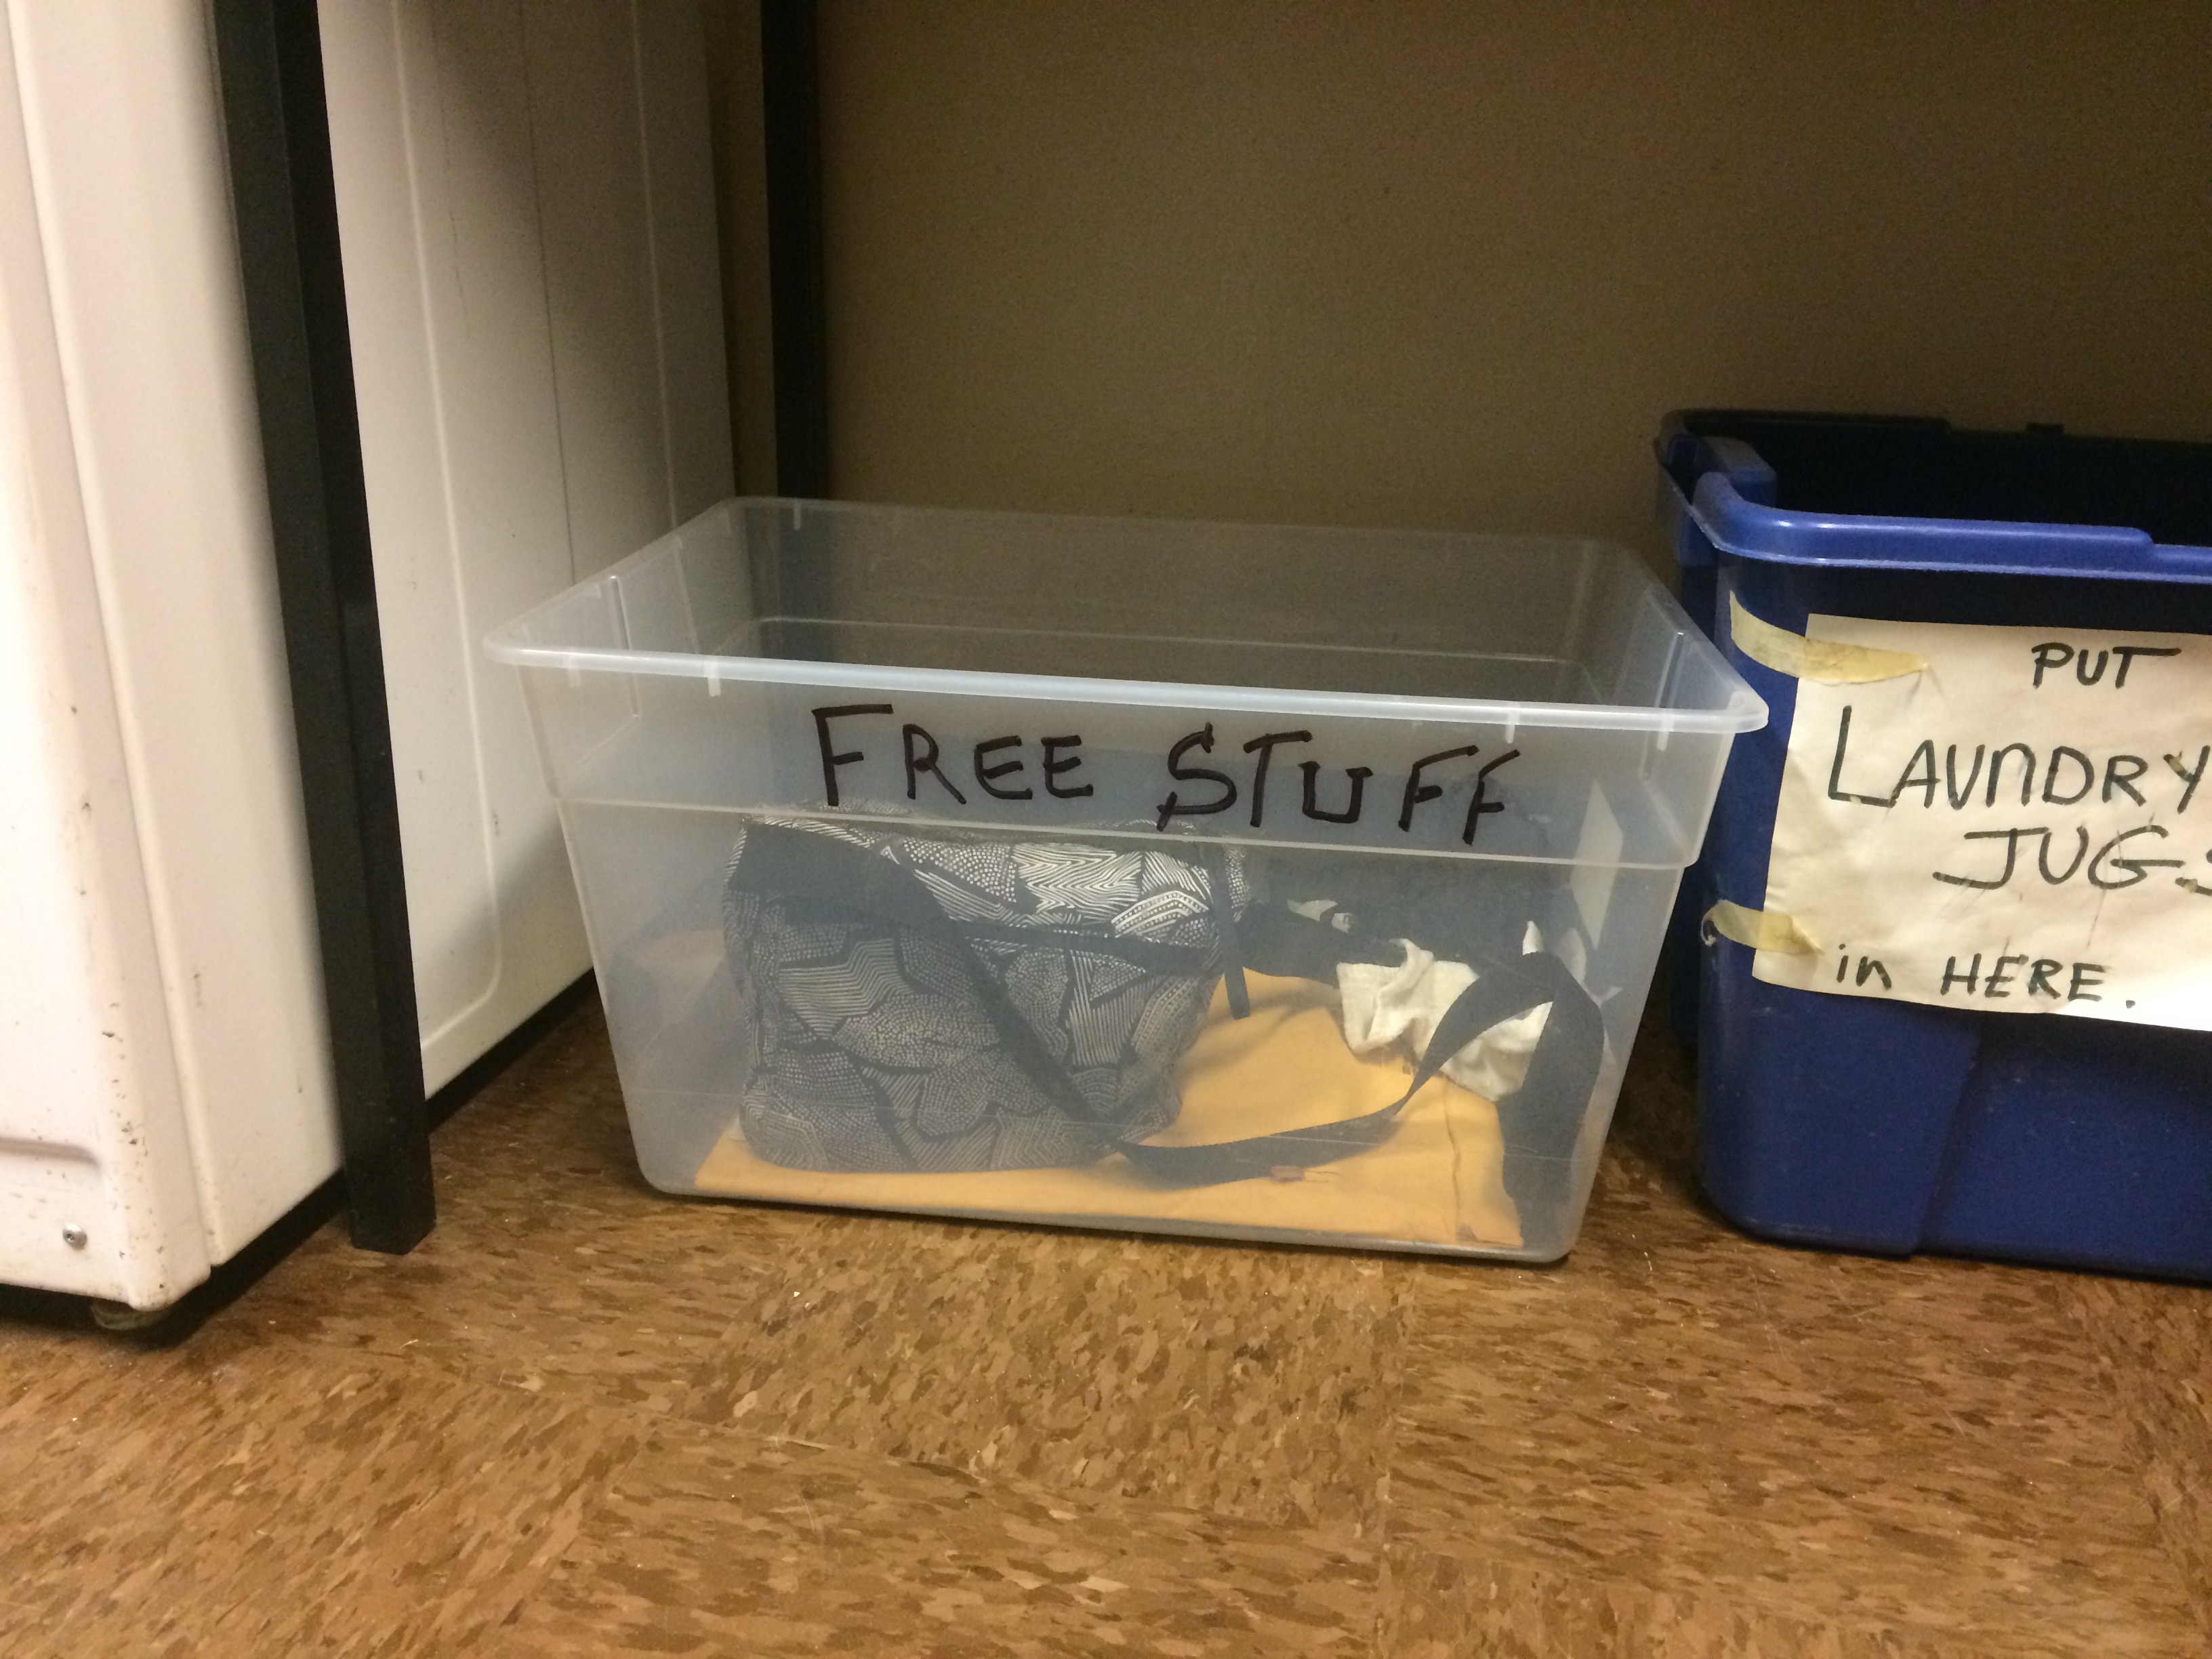 Free stuff box in the laundry room of Jacquie Ottman's NYC apartment building.